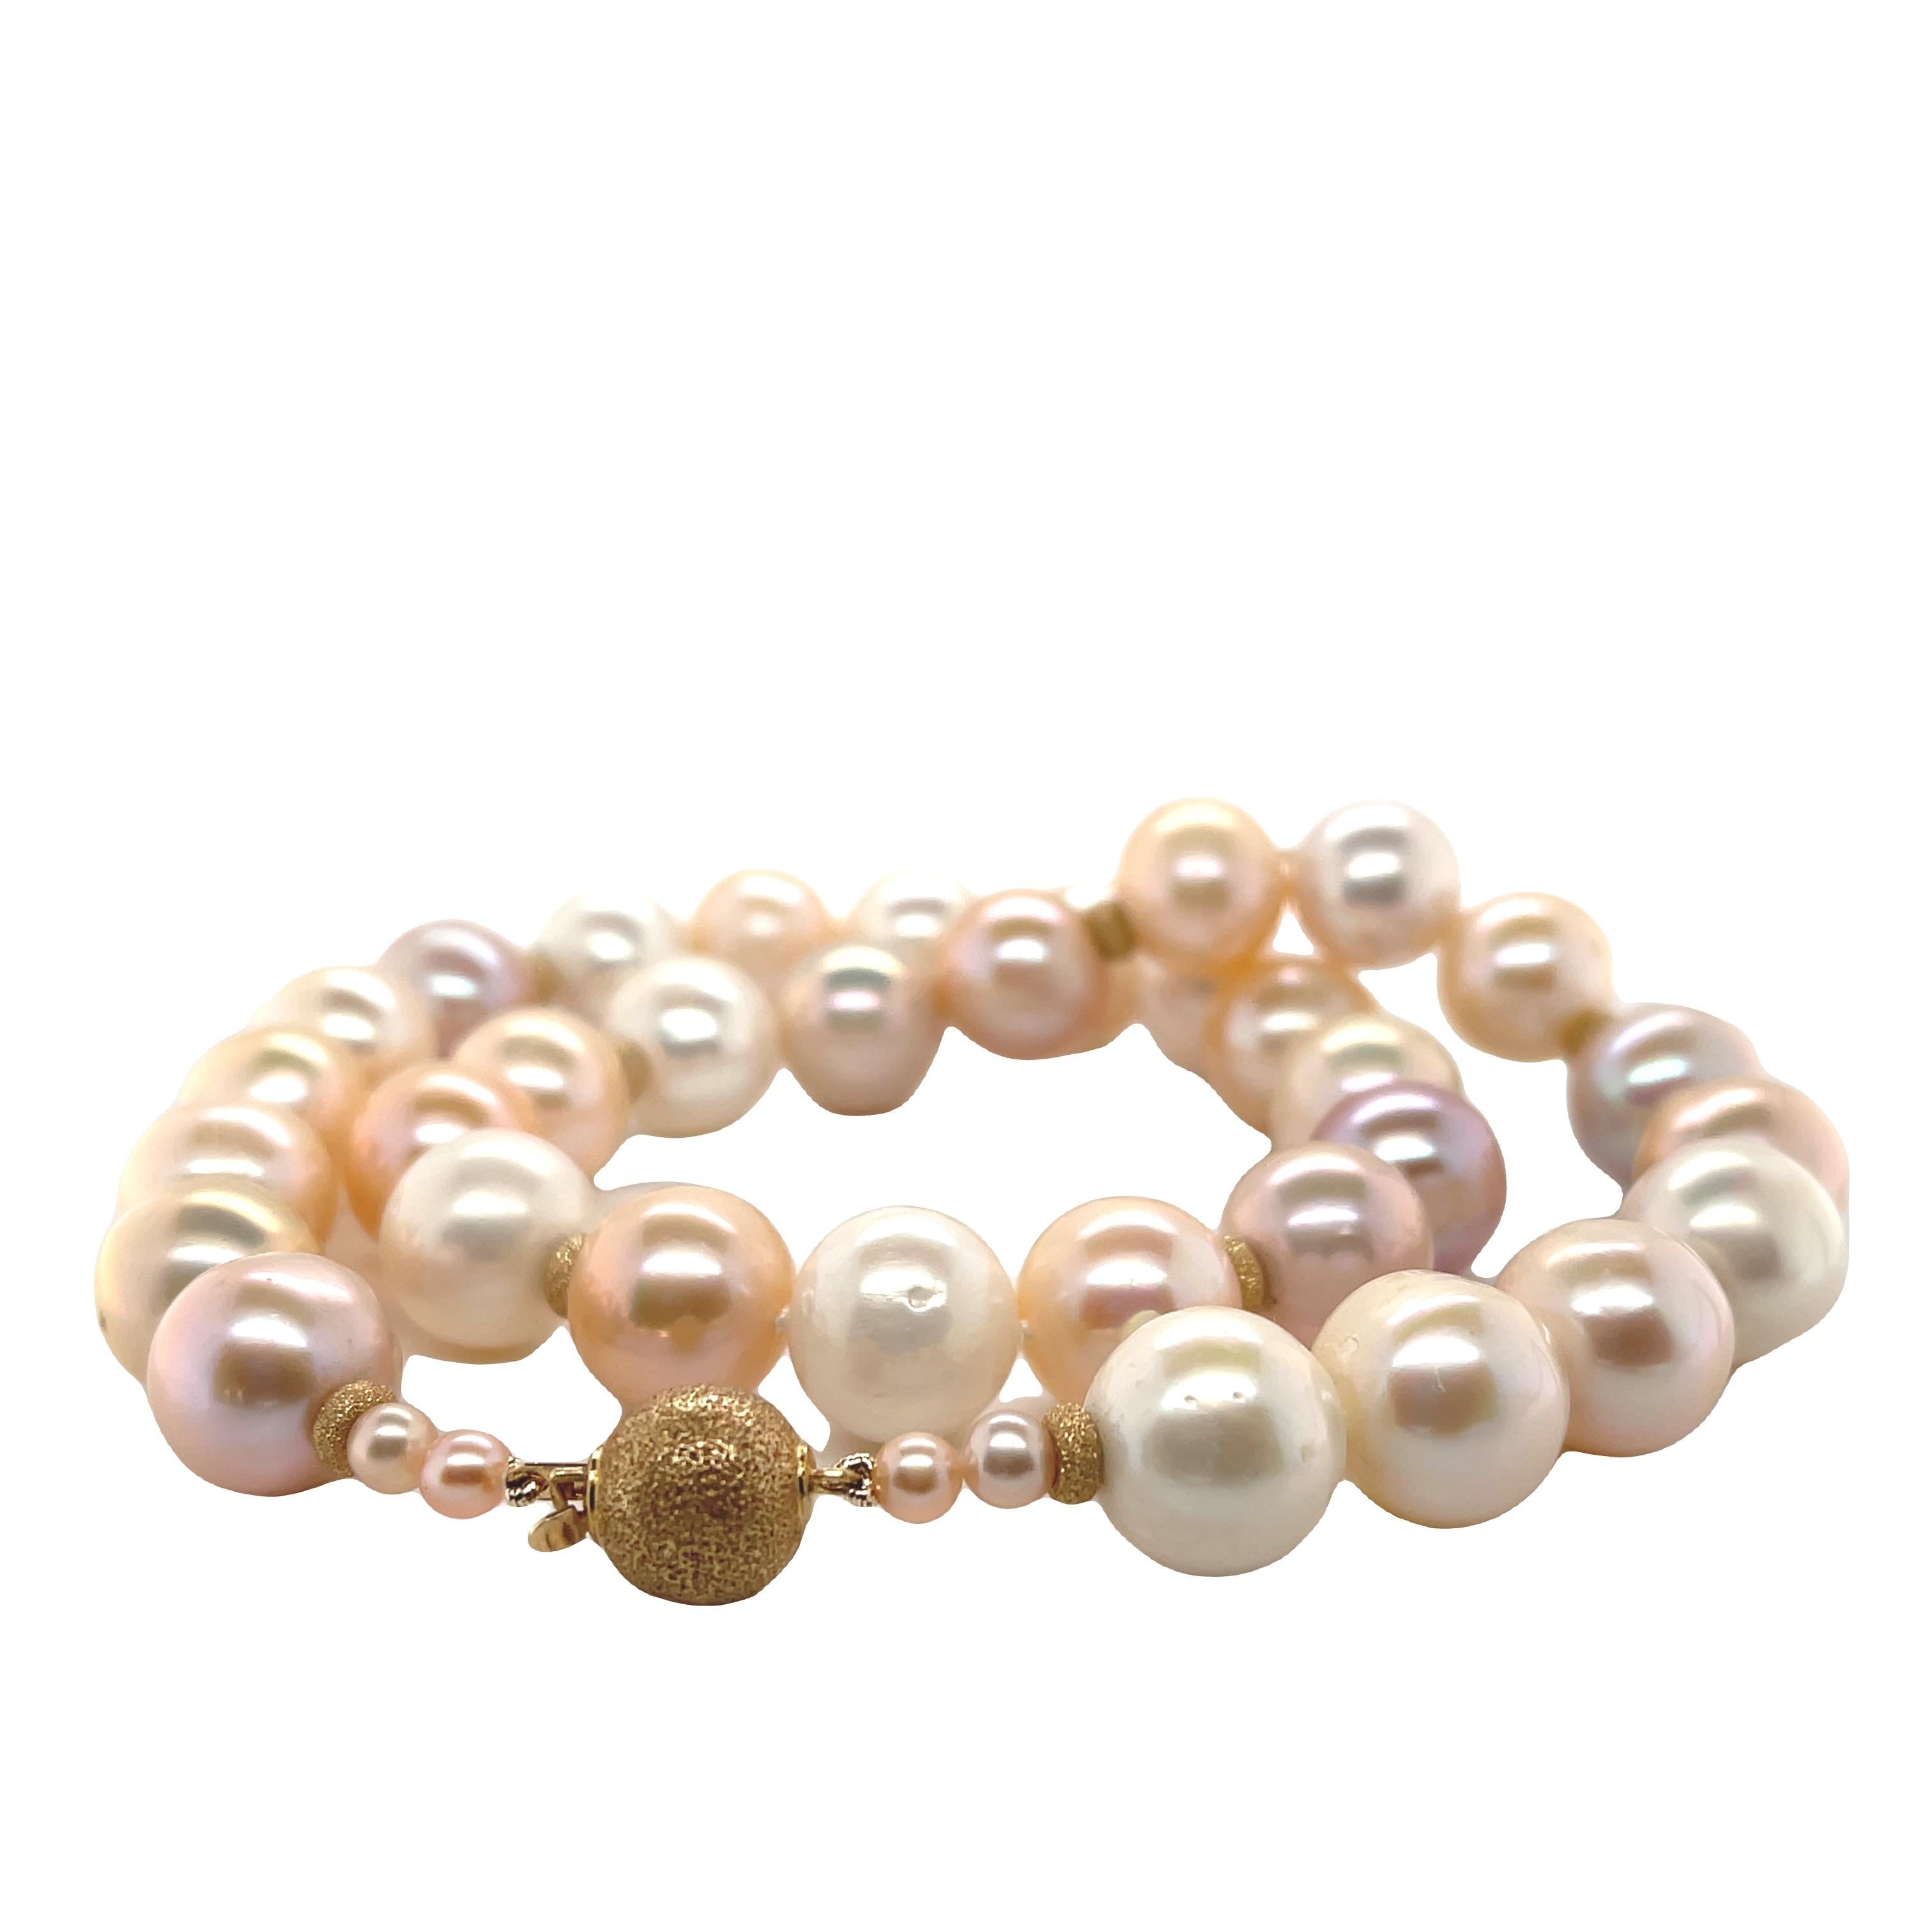 Artisan 12-13mm Peach Freshwater Pearl Necklace with 14k Yellow Gold Accents For Sale